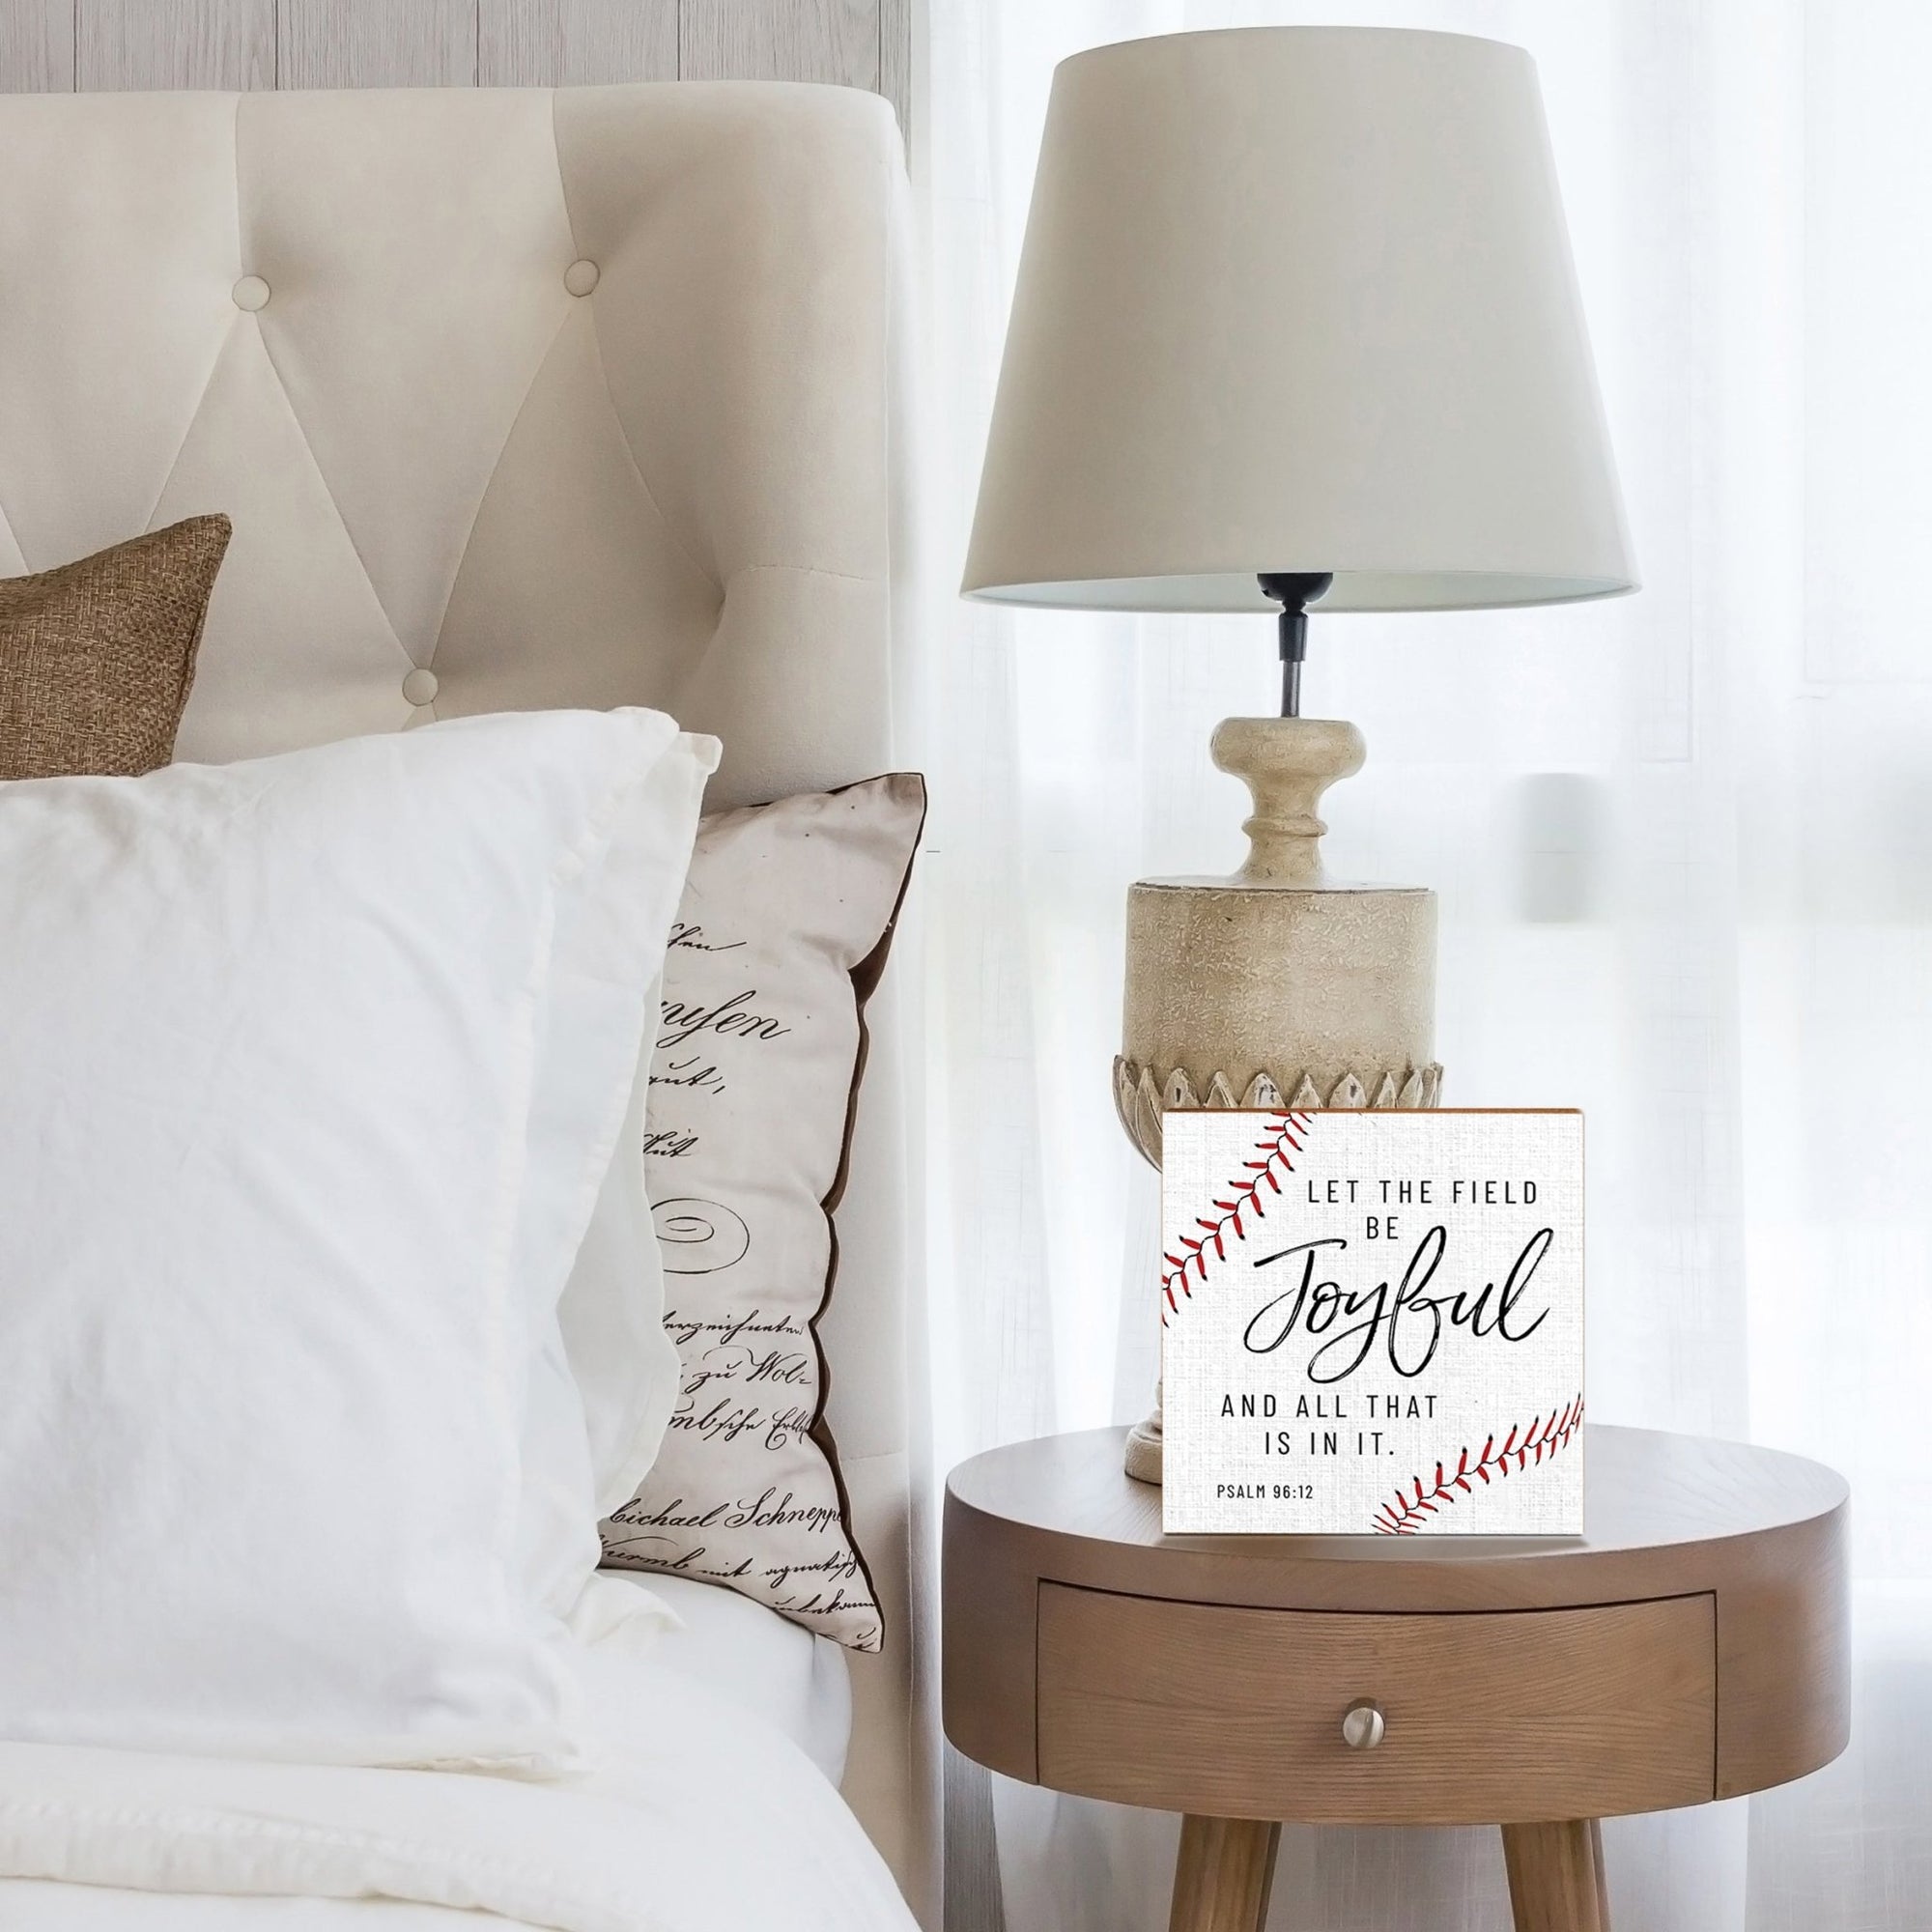 Rustic Wooden Baseball Shadow Box Shelf Décor With Inspiring Bible Verses - Let The Field - LifeSong Milestones